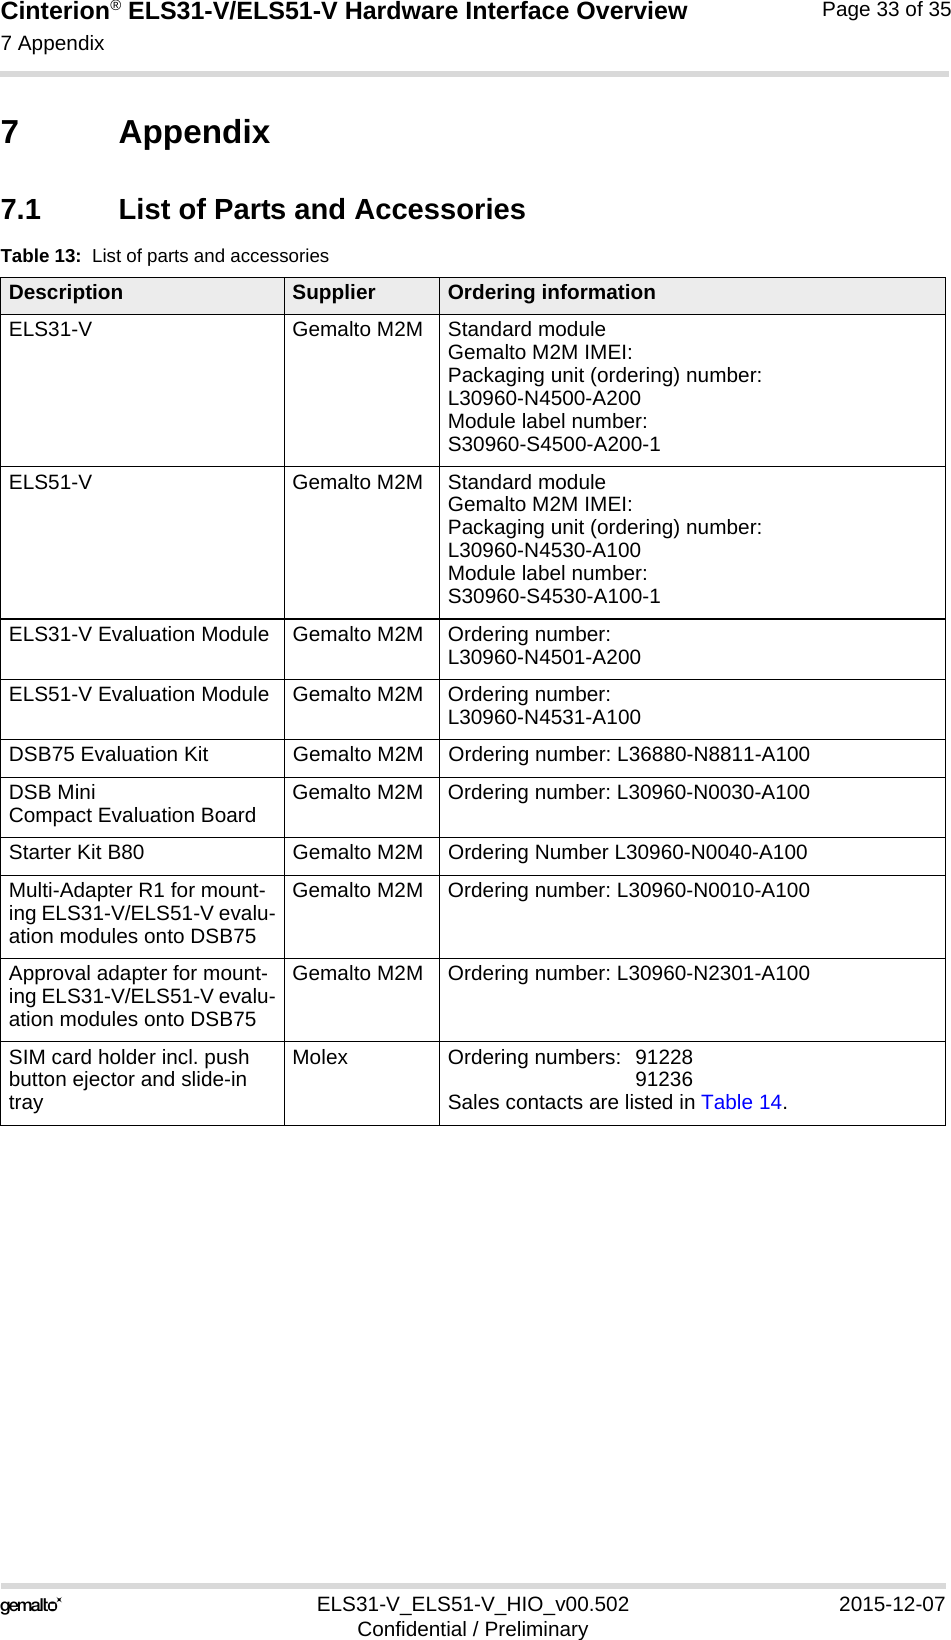 Cinterion® ELS31-V/ELS51-V Hardware Interface Overview7 Appendix34ELS31-V_ELS51-V_HIO_v00.502 2015-12-07Confidential / PreliminaryPage 33 of 357 Appendix7.1 List of Parts and AccessoriesTable 13:  List of parts and accessoriesDescription Supplier Ordering informationELS31-V Gemalto M2M Standard module Gemalto M2M IMEI:Packaging unit (ordering) number:L30960-N4500-A200Module label number:S30960-S4500-A200-1ELS51-V Gemalto M2M Standard module Gemalto M2M IMEI:Packaging unit (ordering) number:L30960-N4530-A100Module label number:S30960-S4530-A100-1ELS31-V Evaluation Module Gemalto M2M Ordering number: L30960-N4501-A200ELS51-V Evaluation Module Gemalto M2M Ordering number: L30960-N4531-A100DSB75 Evaluation Kit Gemalto M2M Ordering number: L36880-N8811-A100DSB MiniCompact Evaluation Board Gemalto M2M Ordering number: L30960-N0030-A100Starter Kit B80 Gemalto M2M Ordering Number L30960-N0040-A100Multi-Adapter R1 for mount-ing ELS31-V/ELS51-V evalu-ation modules onto DSB75Gemalto M2M Ordering number: L30960-N0010-A100Approval adapter for mount-ing ELS31-V/ELS51-V evalu-ation modules onto DSB75Gemalto M2M Ordering number: L30960-N2301-A100SIM card holder incl. push button ejector and slide-in trayMolex Ordering numbers:  91228 91236Sales contacts are listed in Table 14.